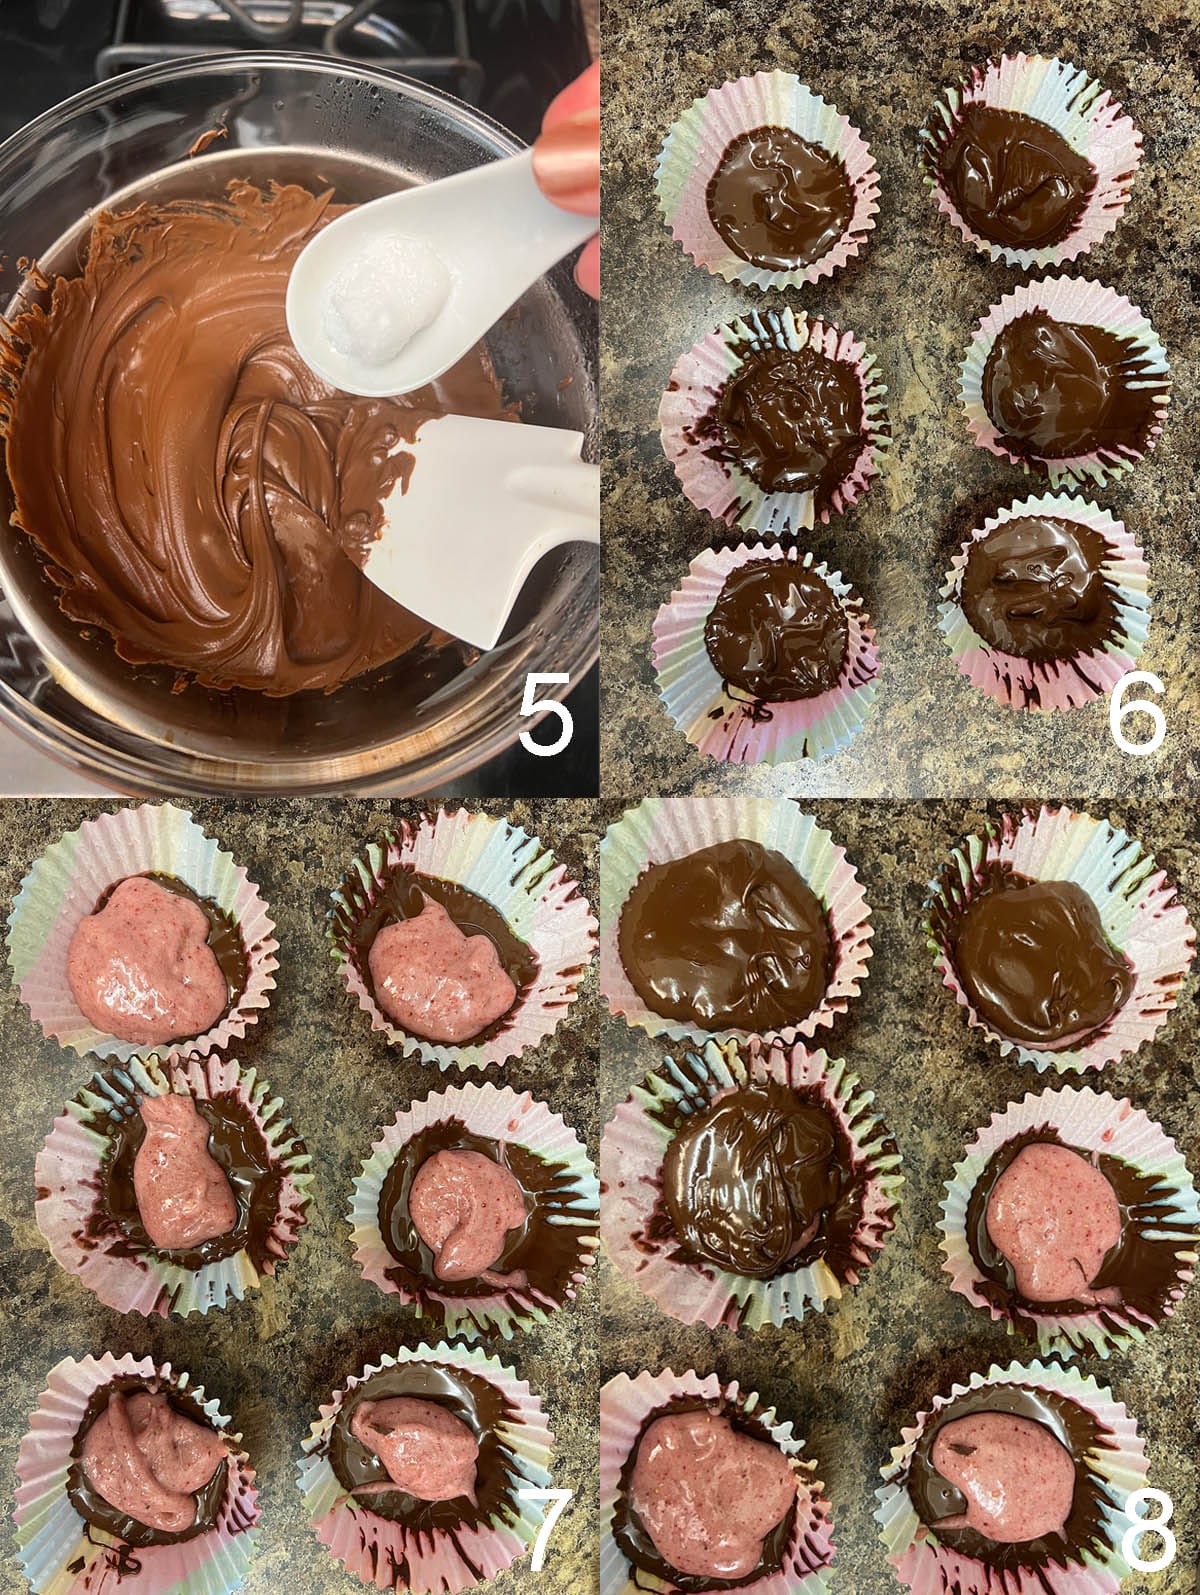 Melted chocolate in a bowl above saucepan, then filled in cupcake liners. Strawberry filling added, then chocolate poured on top.